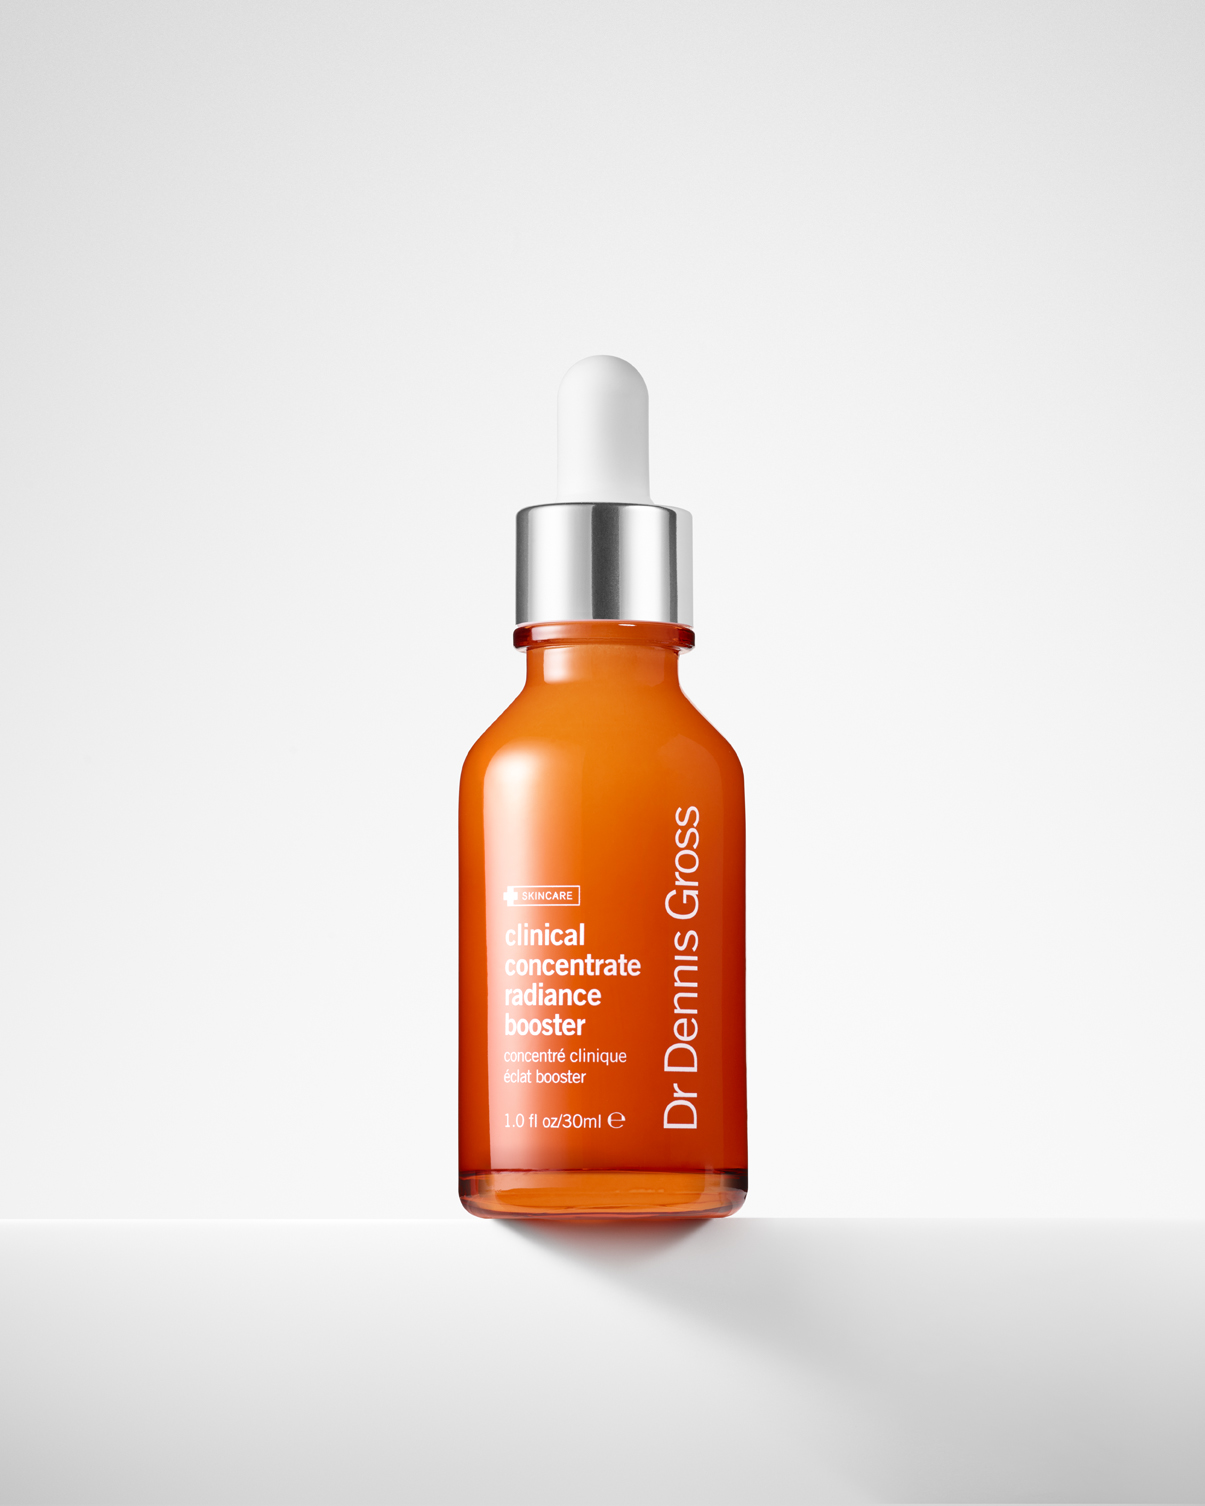 clinical_concentrate_radiance_booster_031